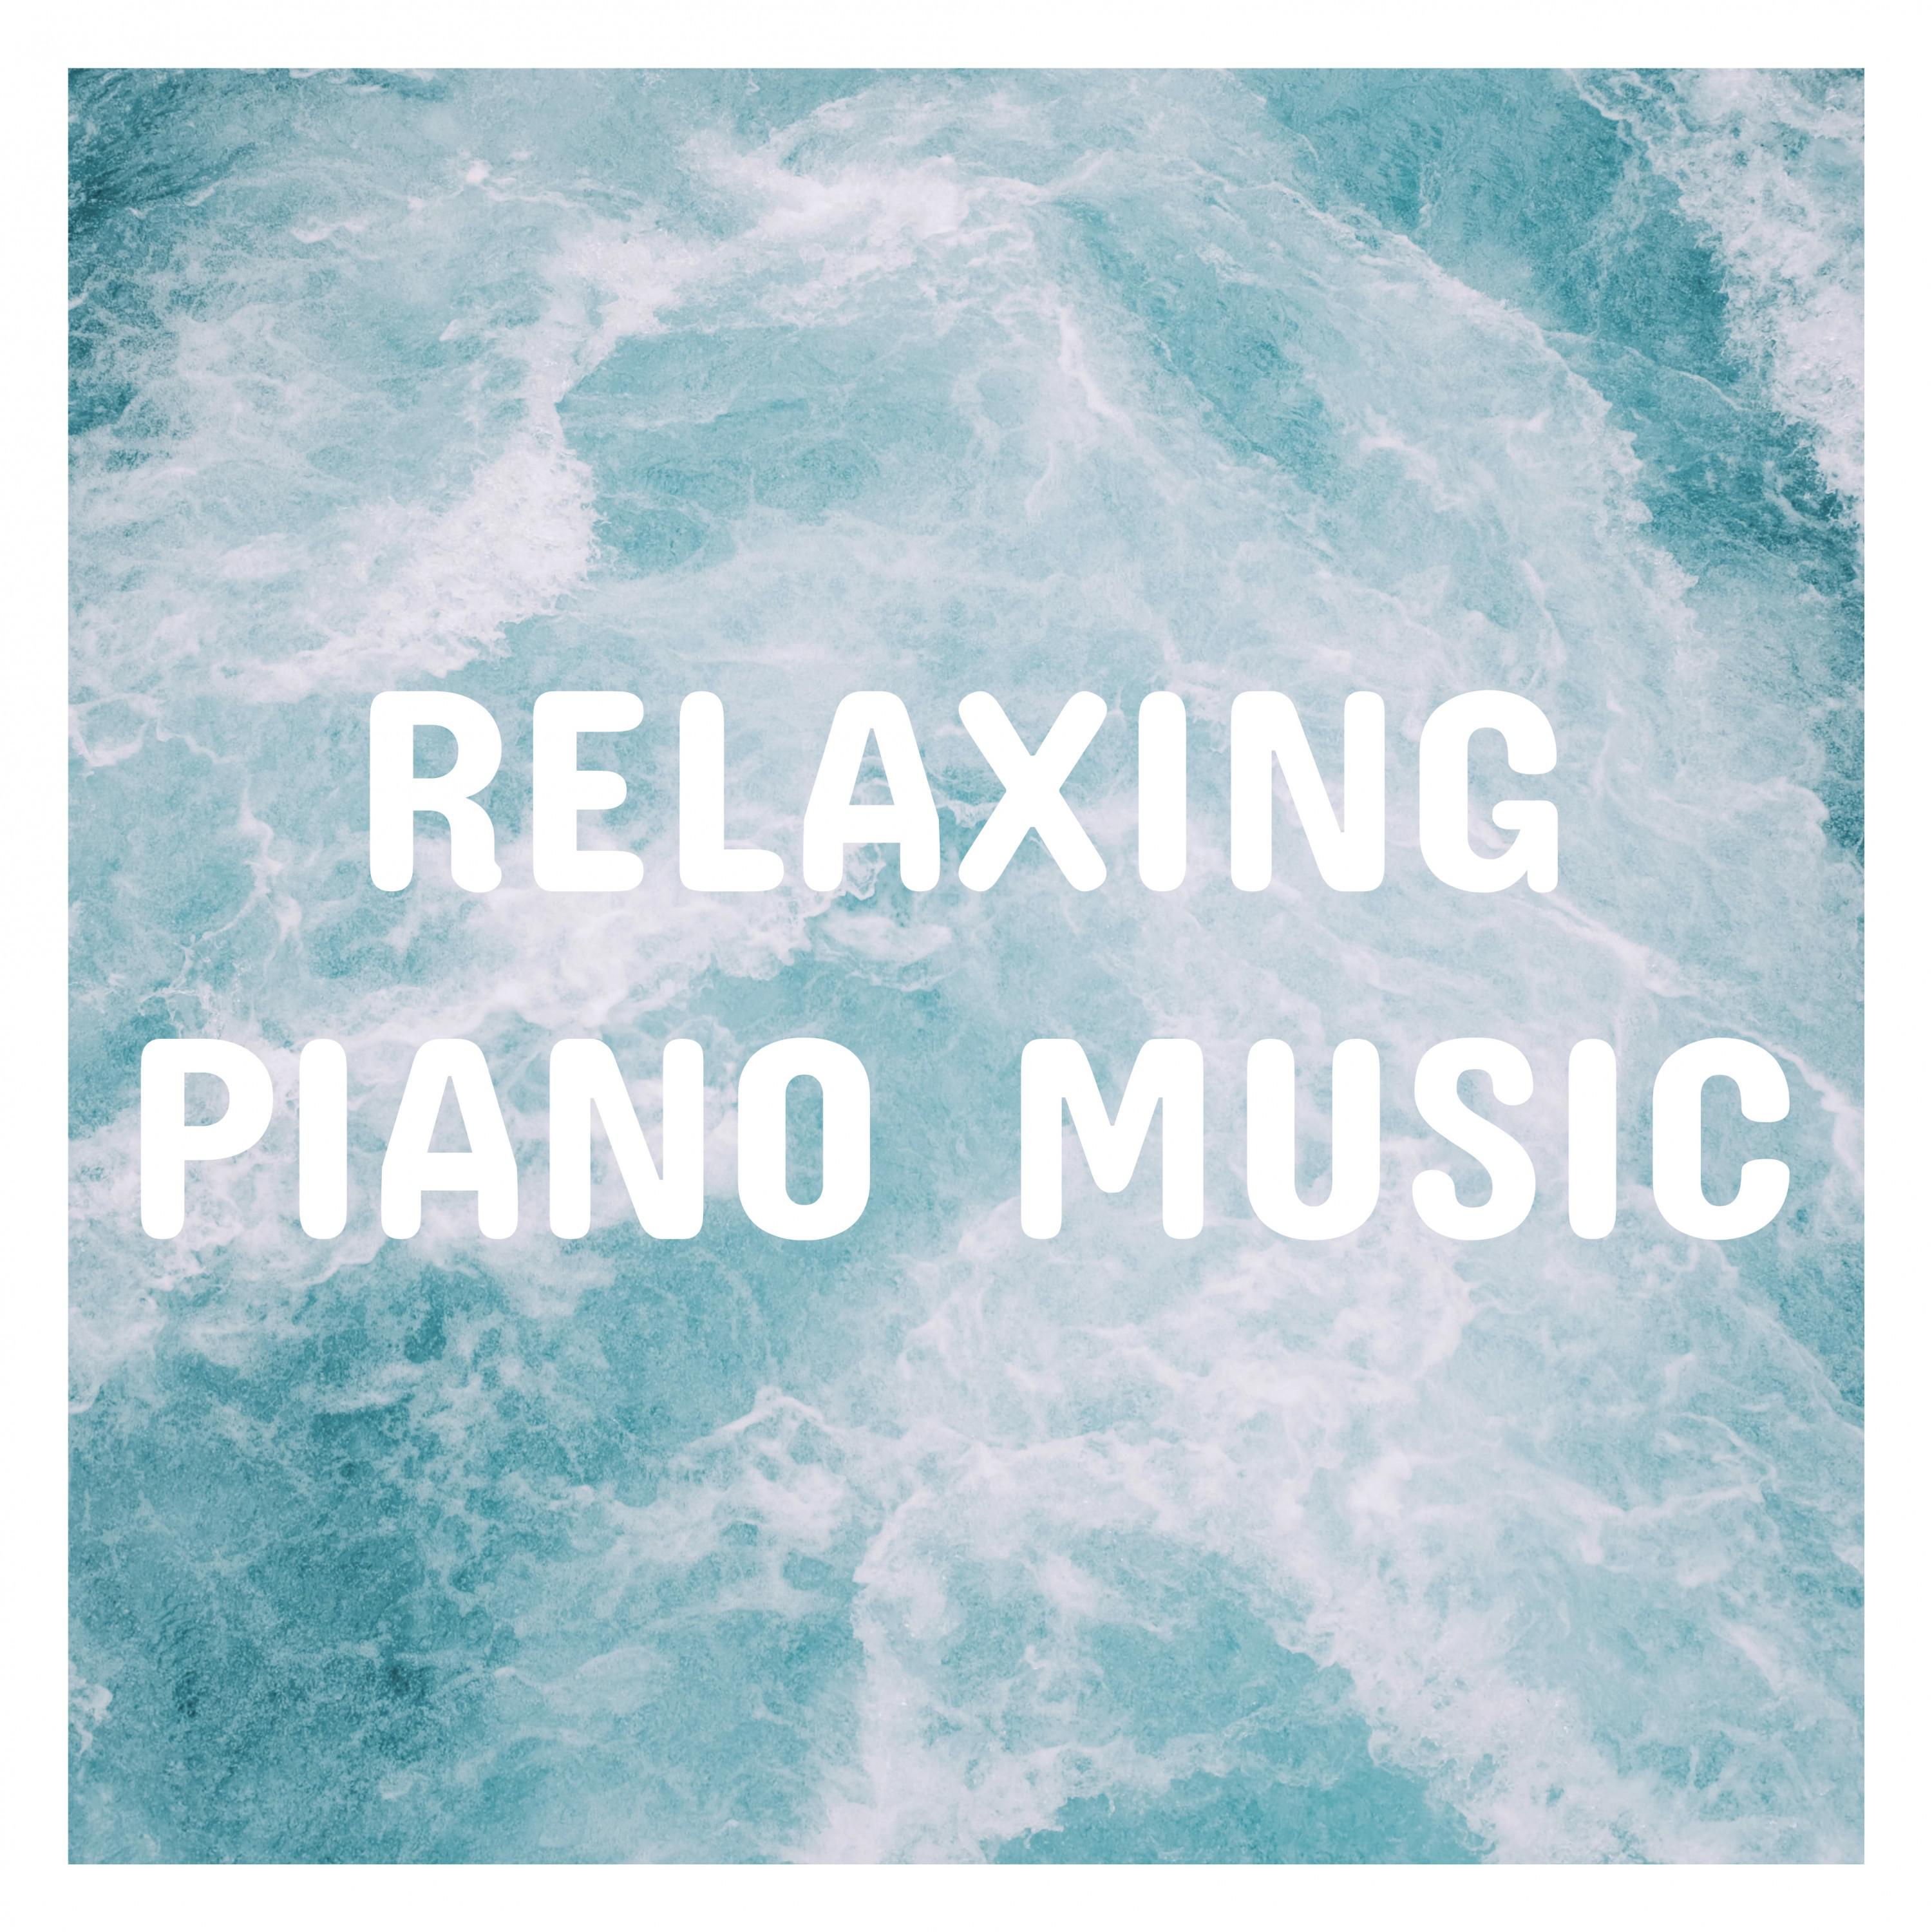 Relaxing Piano Music, Serenity, Inner Focus, Peaceful Soul, Harmony, Calm, Soothing Melody